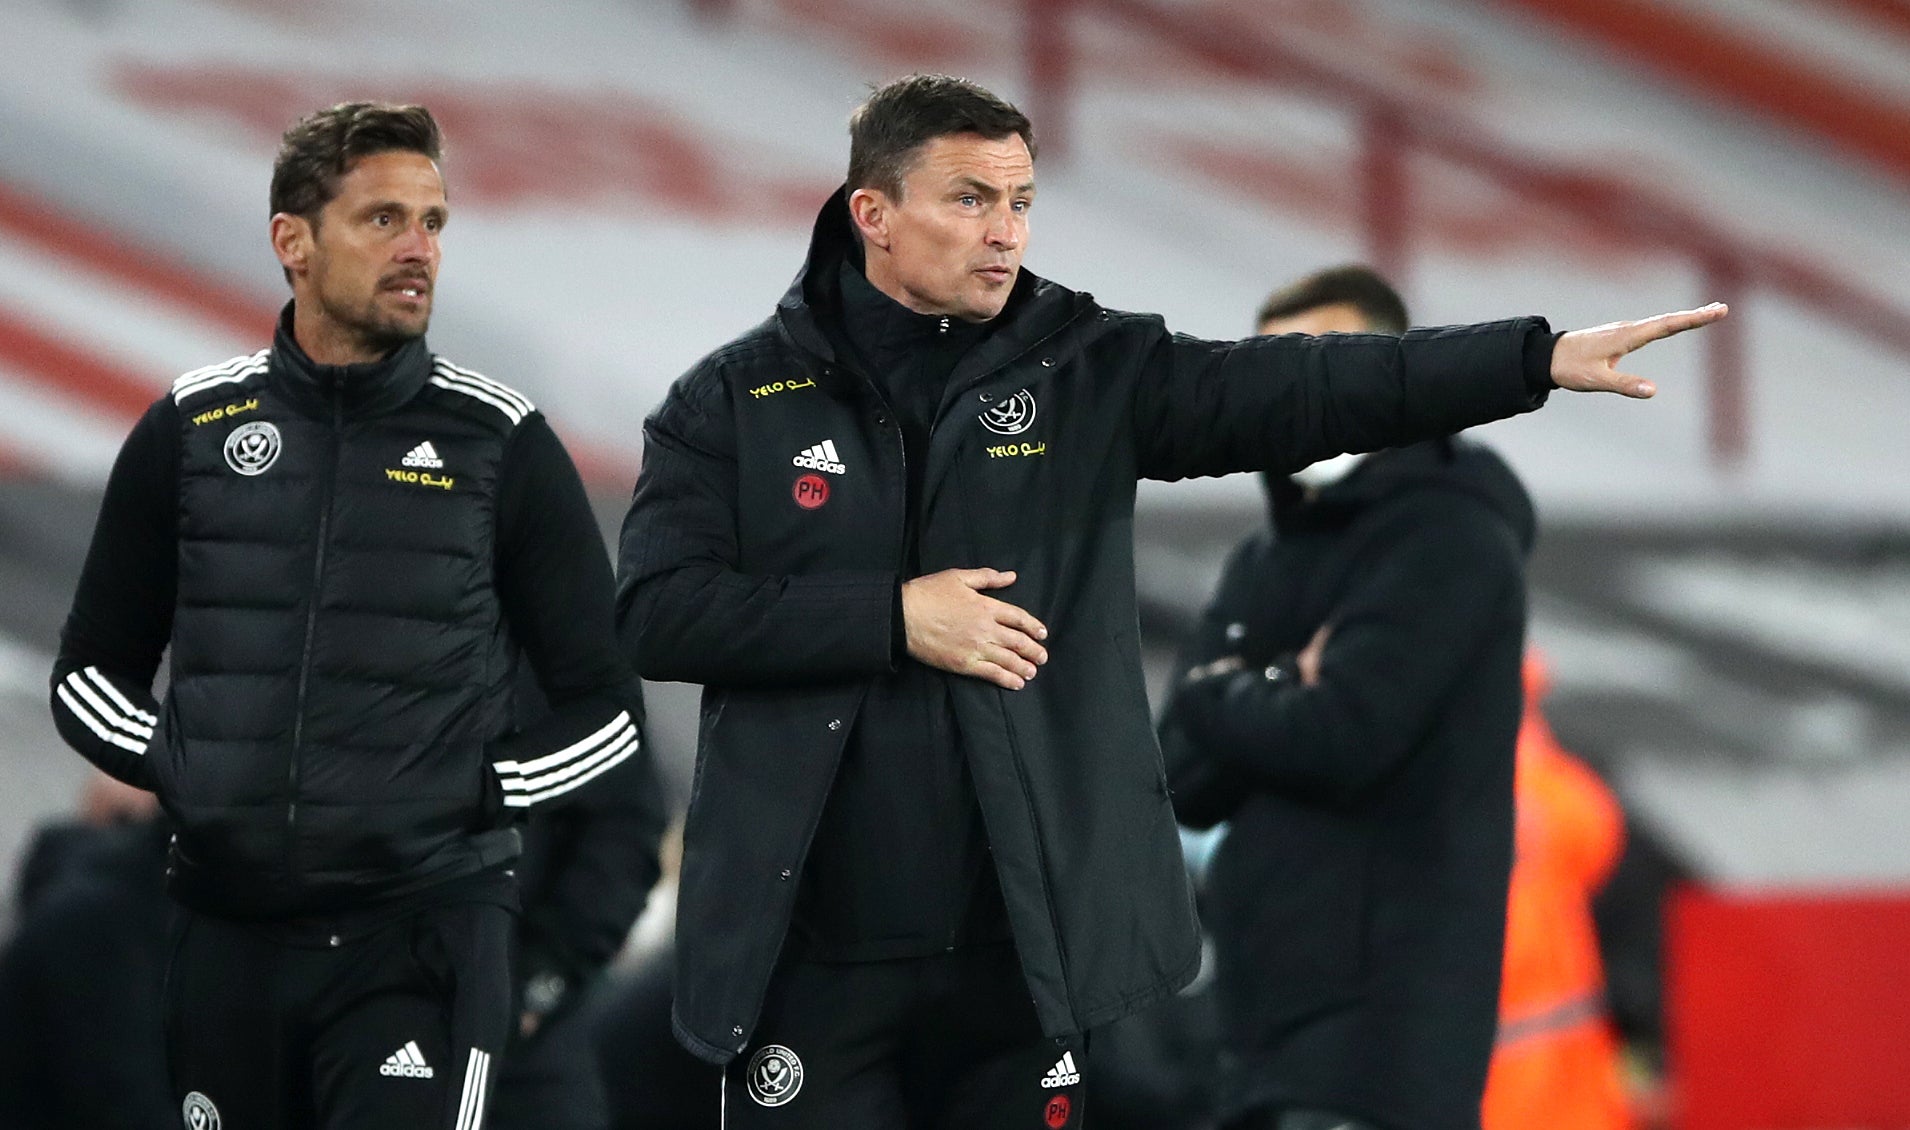 Paul Heckingbottom thinks Burnley are a good example for Sheffield United to follow.